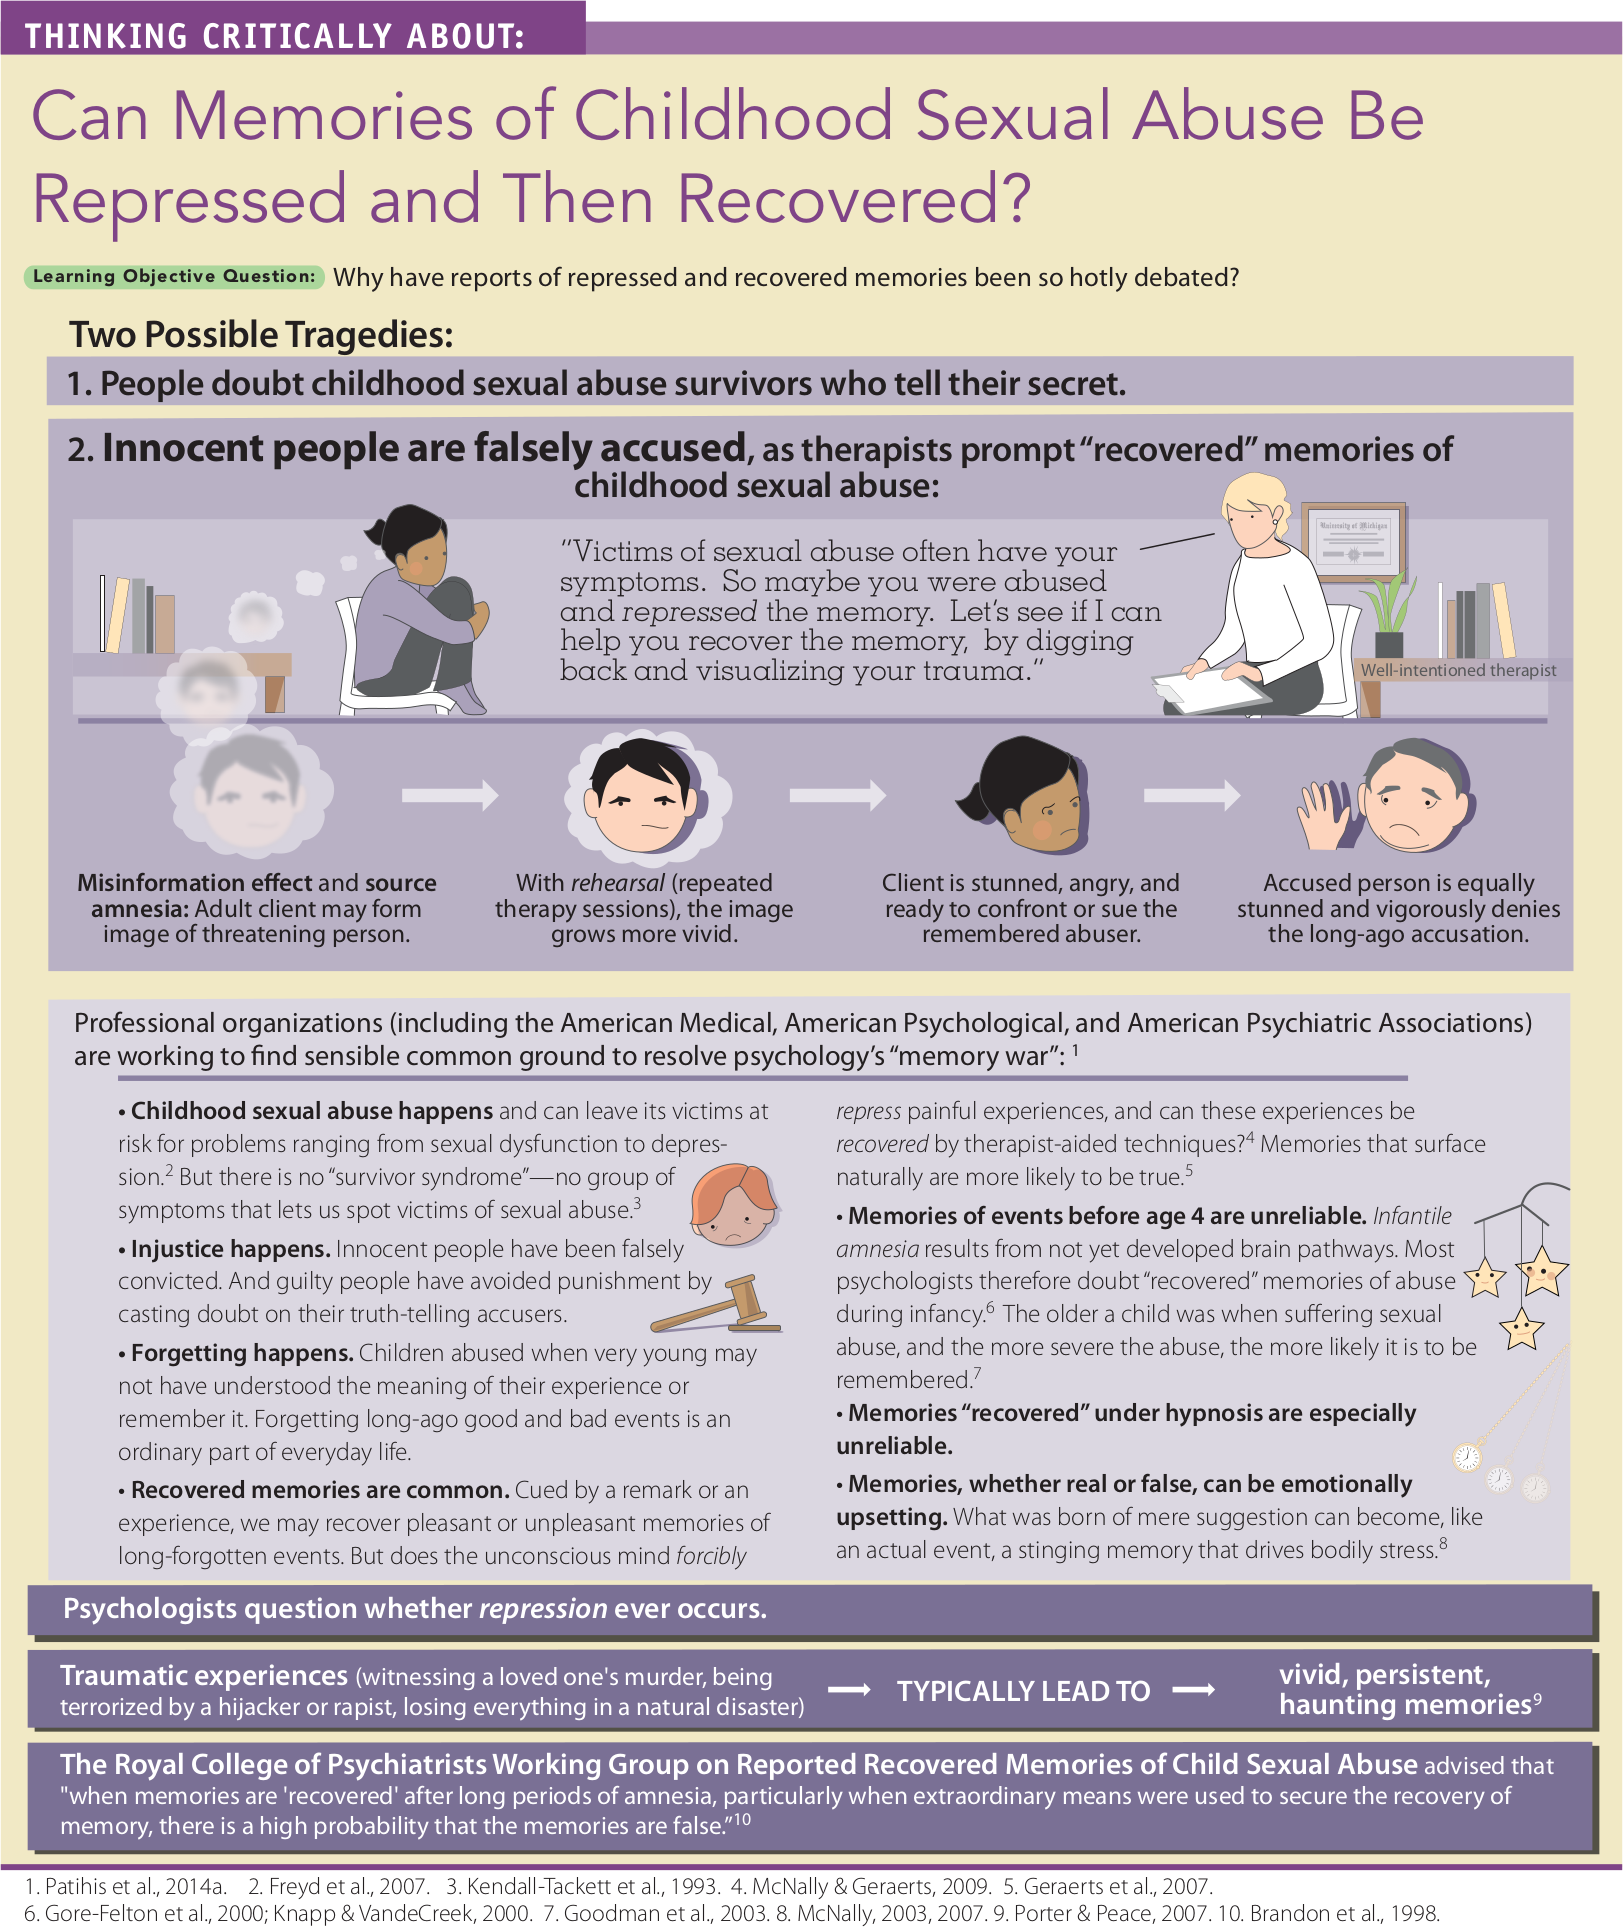 An infographic presents a critical analysis on whether memories of childhood sexual abuse be repressed and then recovered. You can read full description from the link below